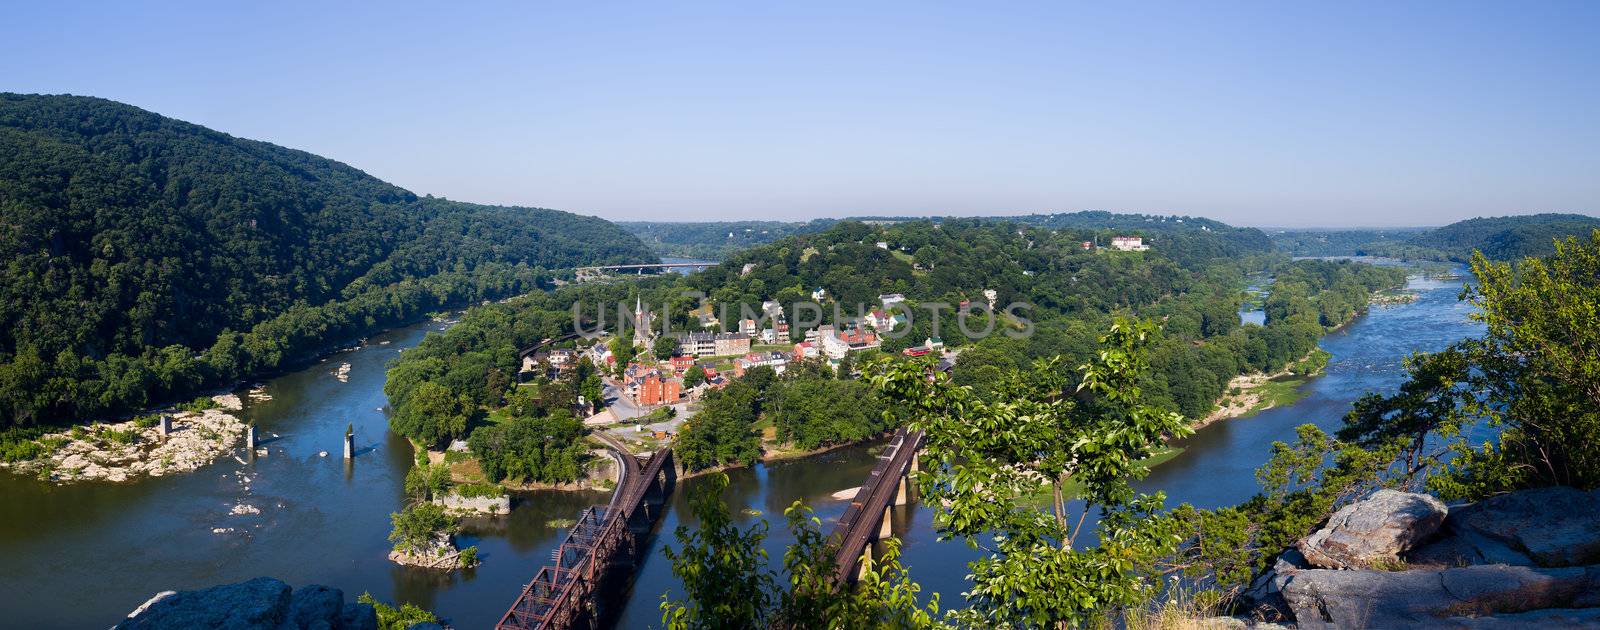 Panorama over Harpers Ferry from Maryland Heights by steheap